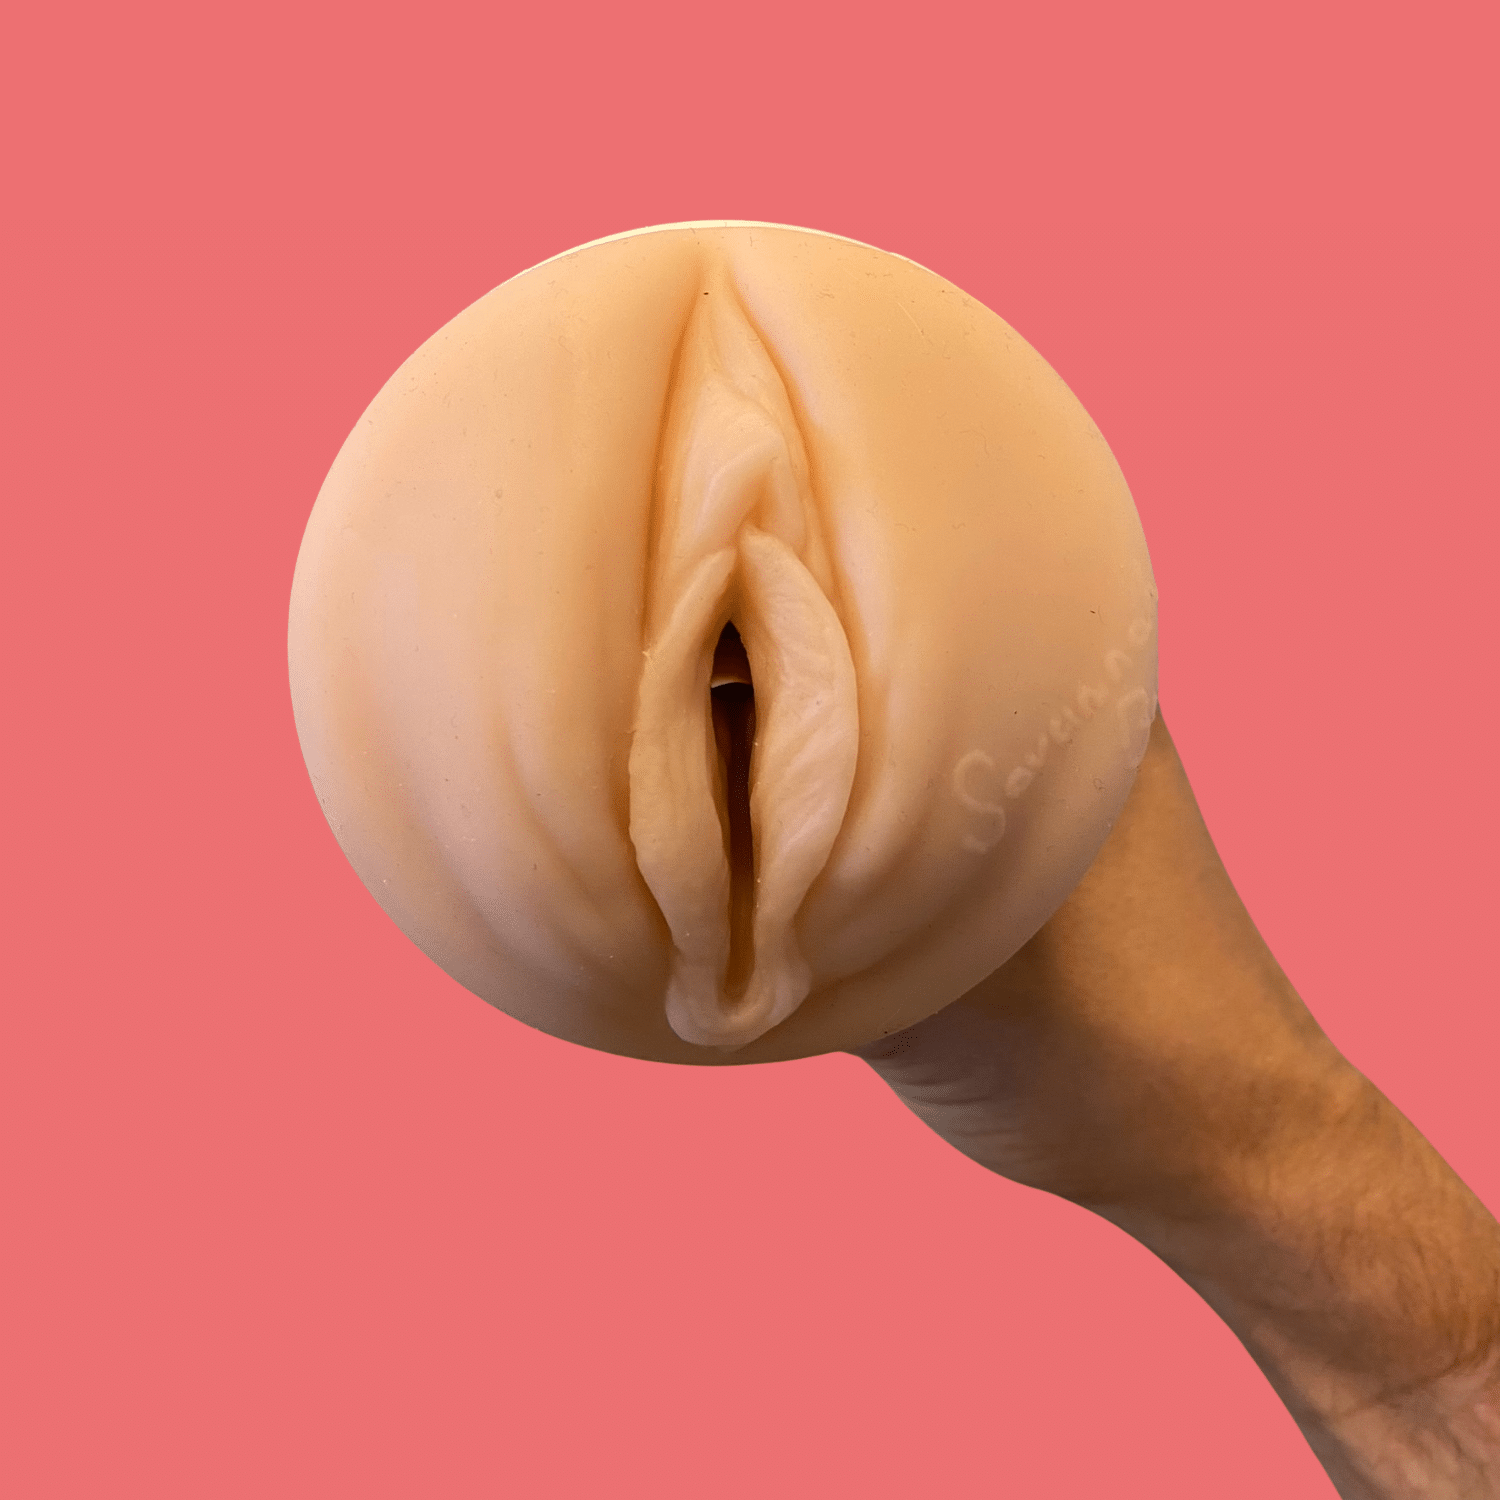 Savannah Bond Fleshlight Review (of the From Australia With Love Sleeve)